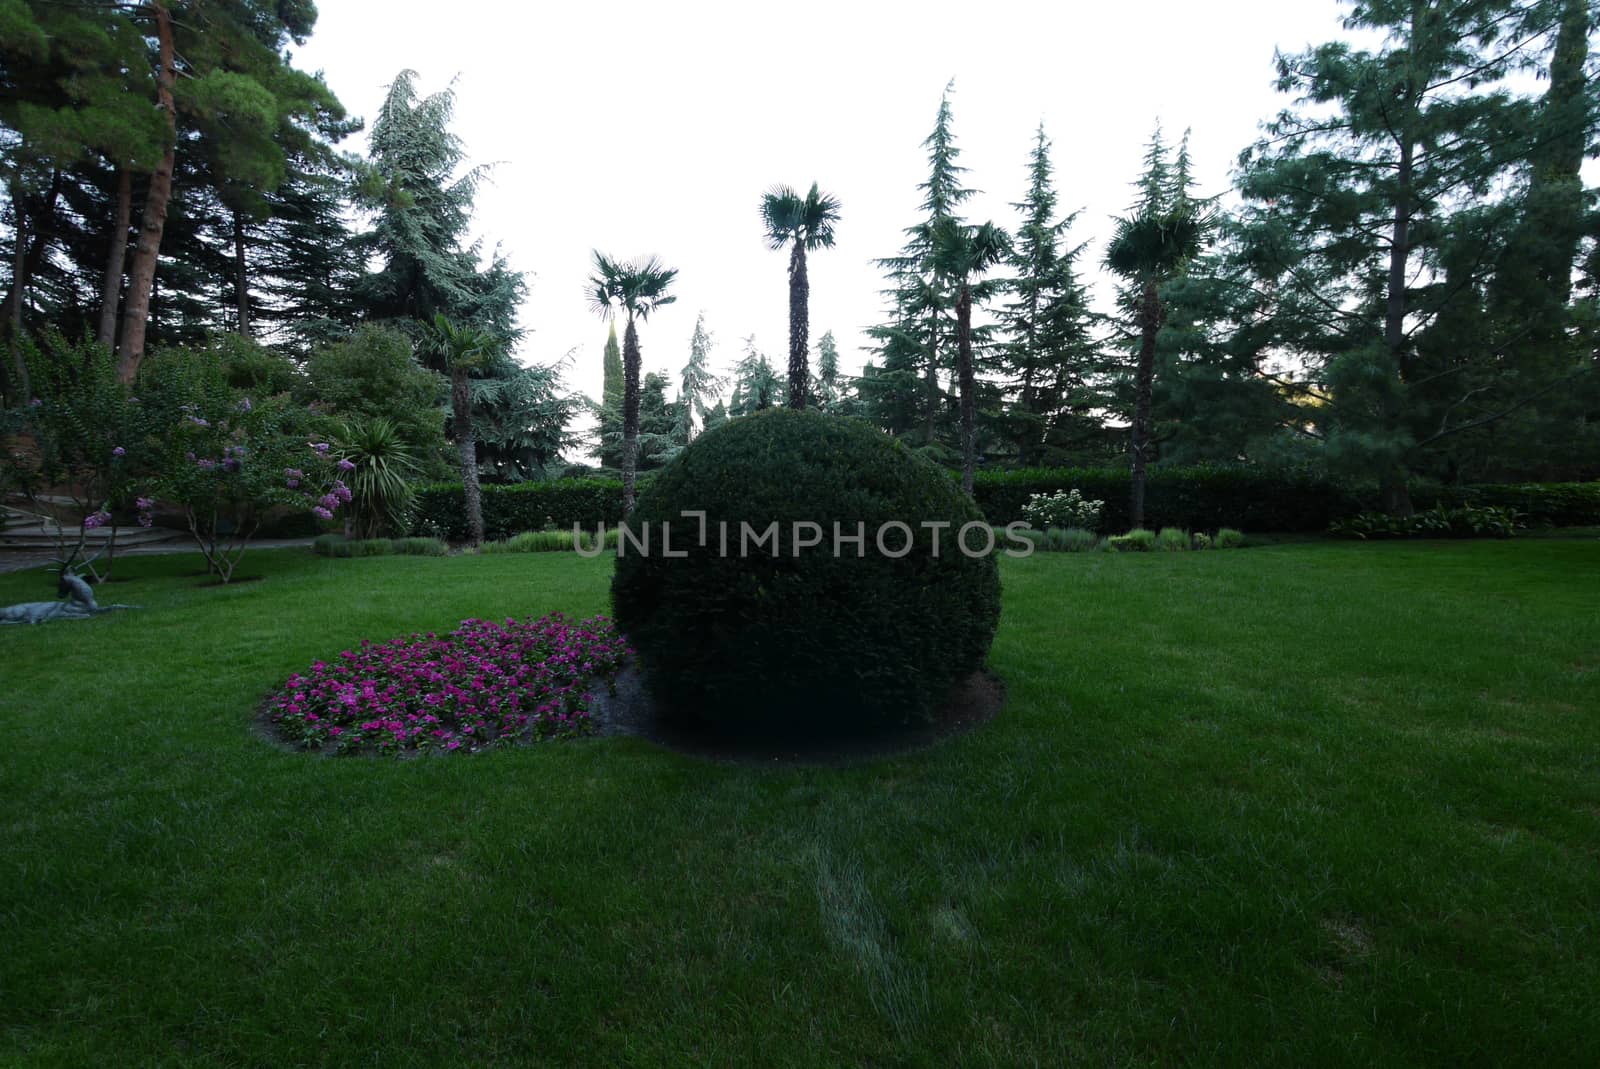 A large lush green bush next to small pink flowers on a background of palm trees and a smoothly cropped lawn